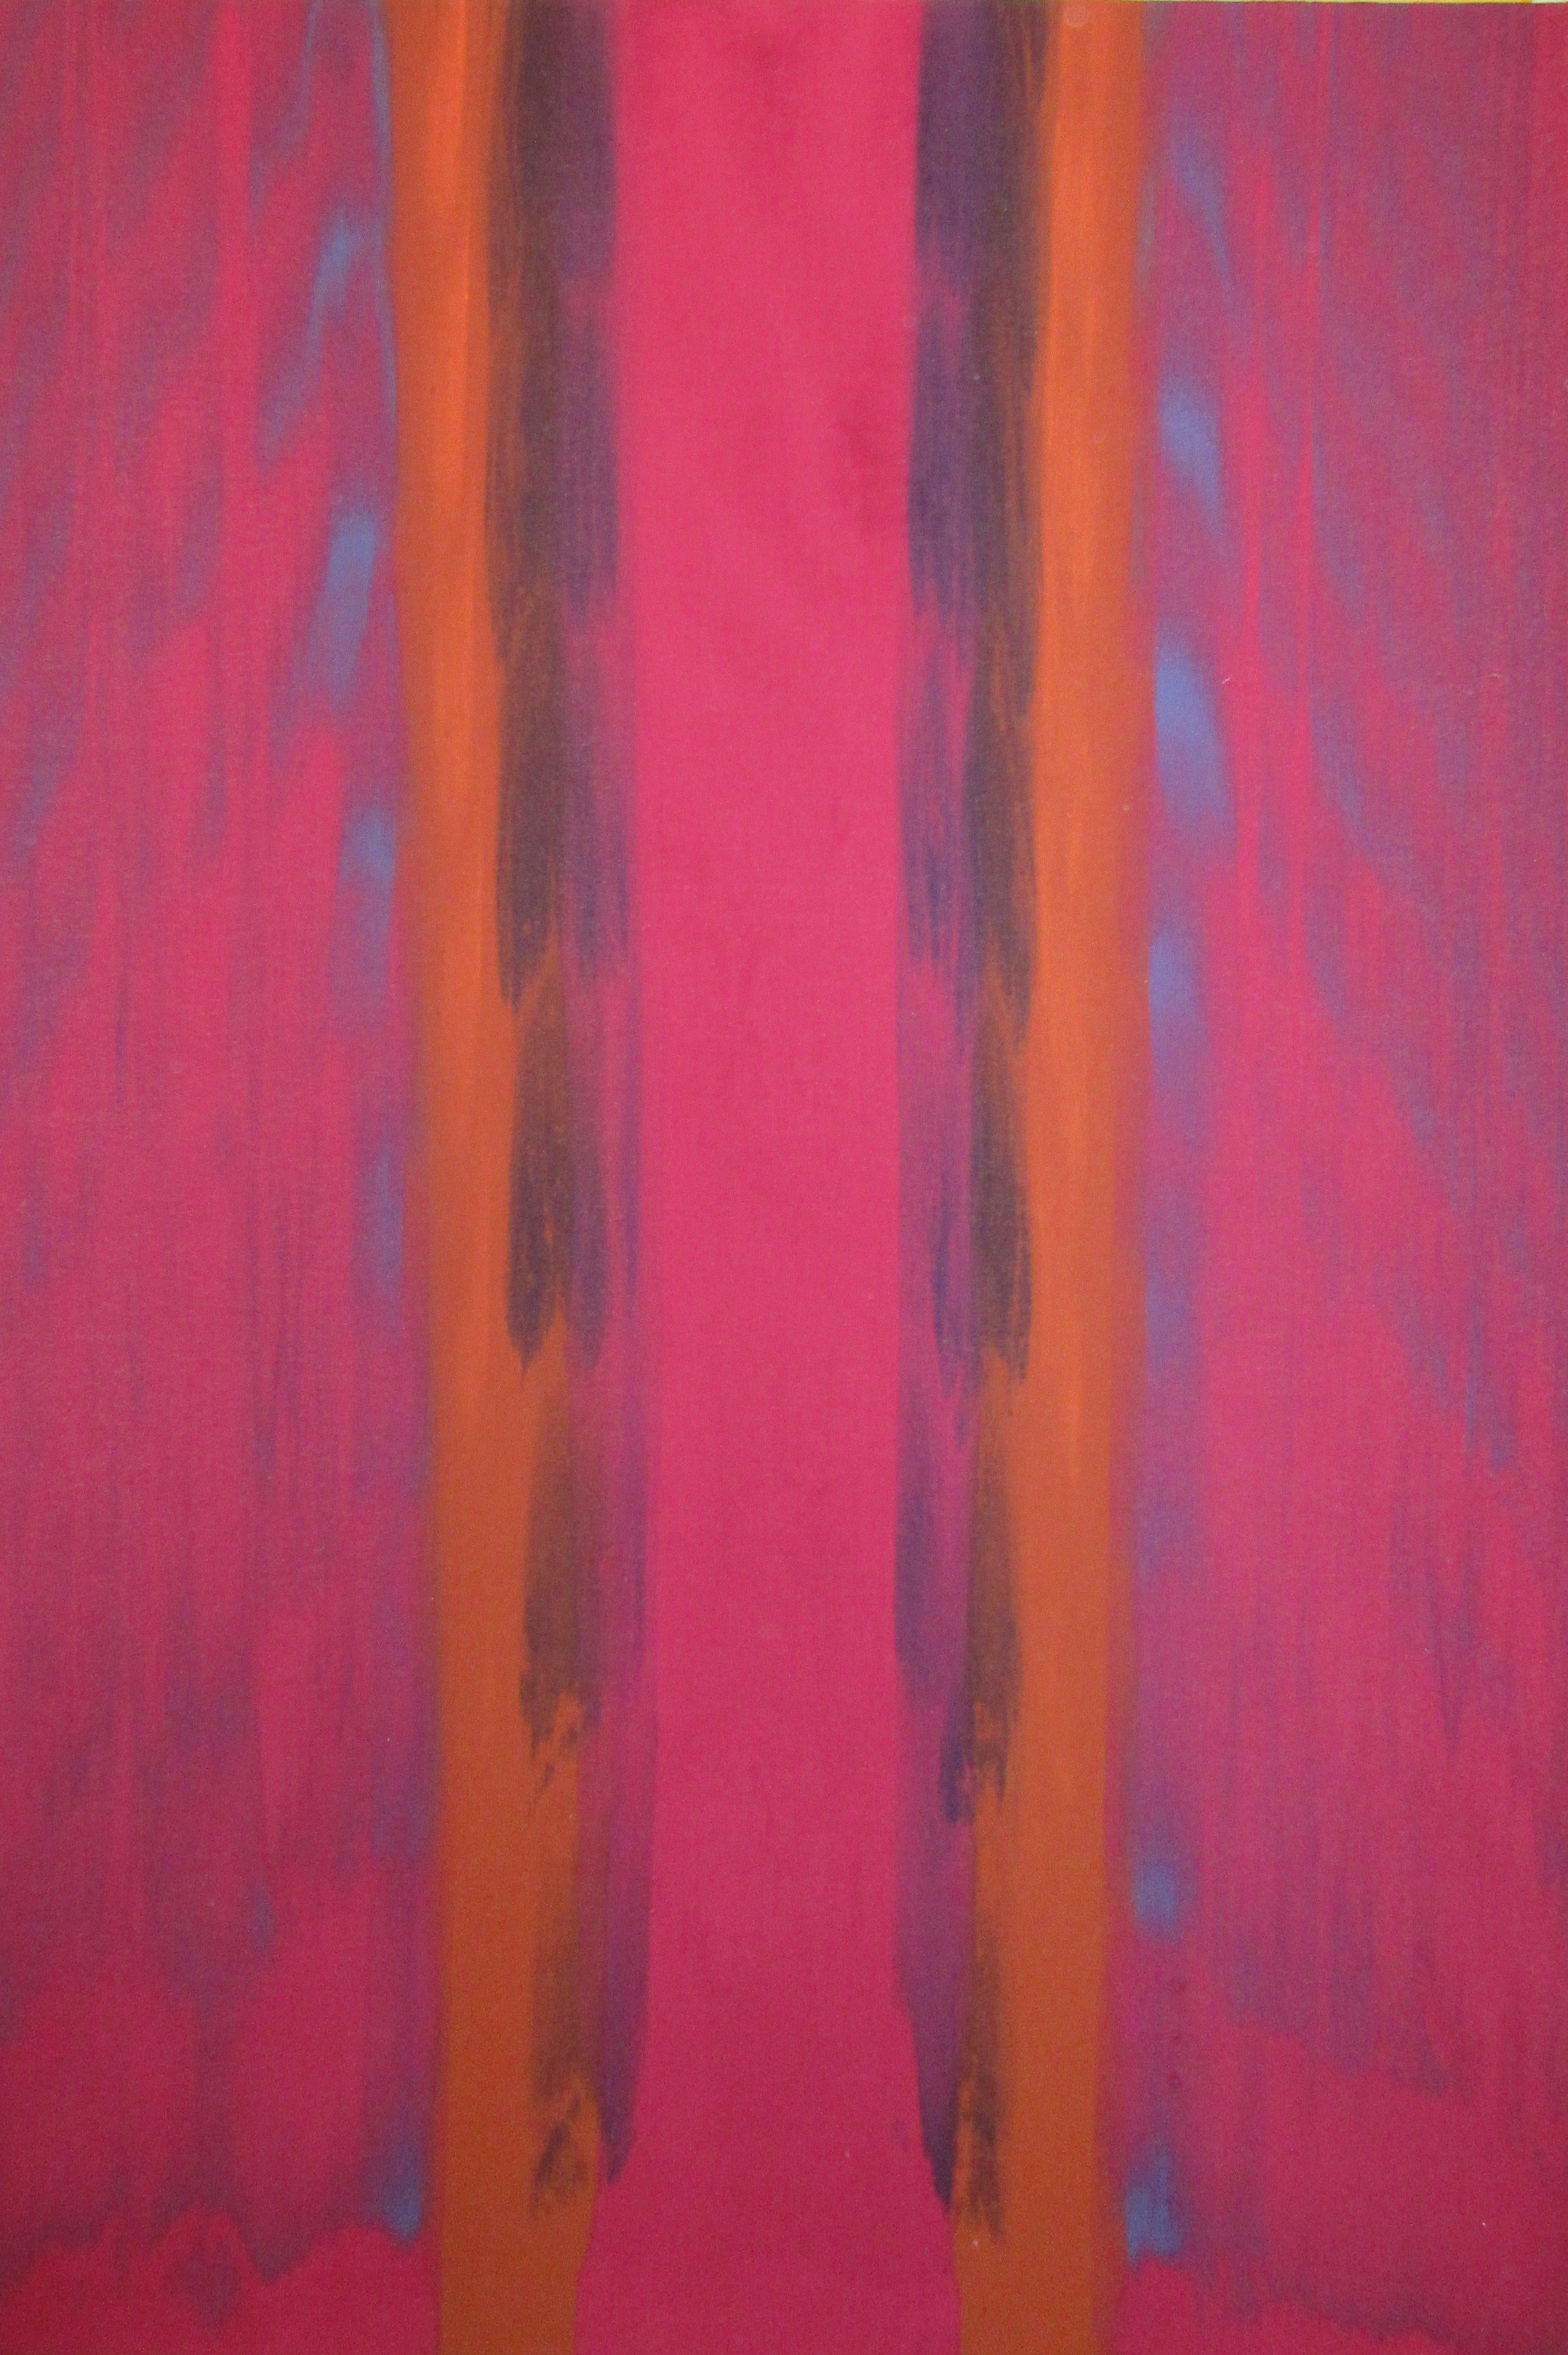 Gene Hedge
Inside Violet, 1966
Acrylic on canvas
61 x 43 inches
(P121)

Gene Hedge was born (1928) and raised in rural Indiana. After military service, he briefly attended Ball State University in Muncie, Indiana. There he encountered the writing of